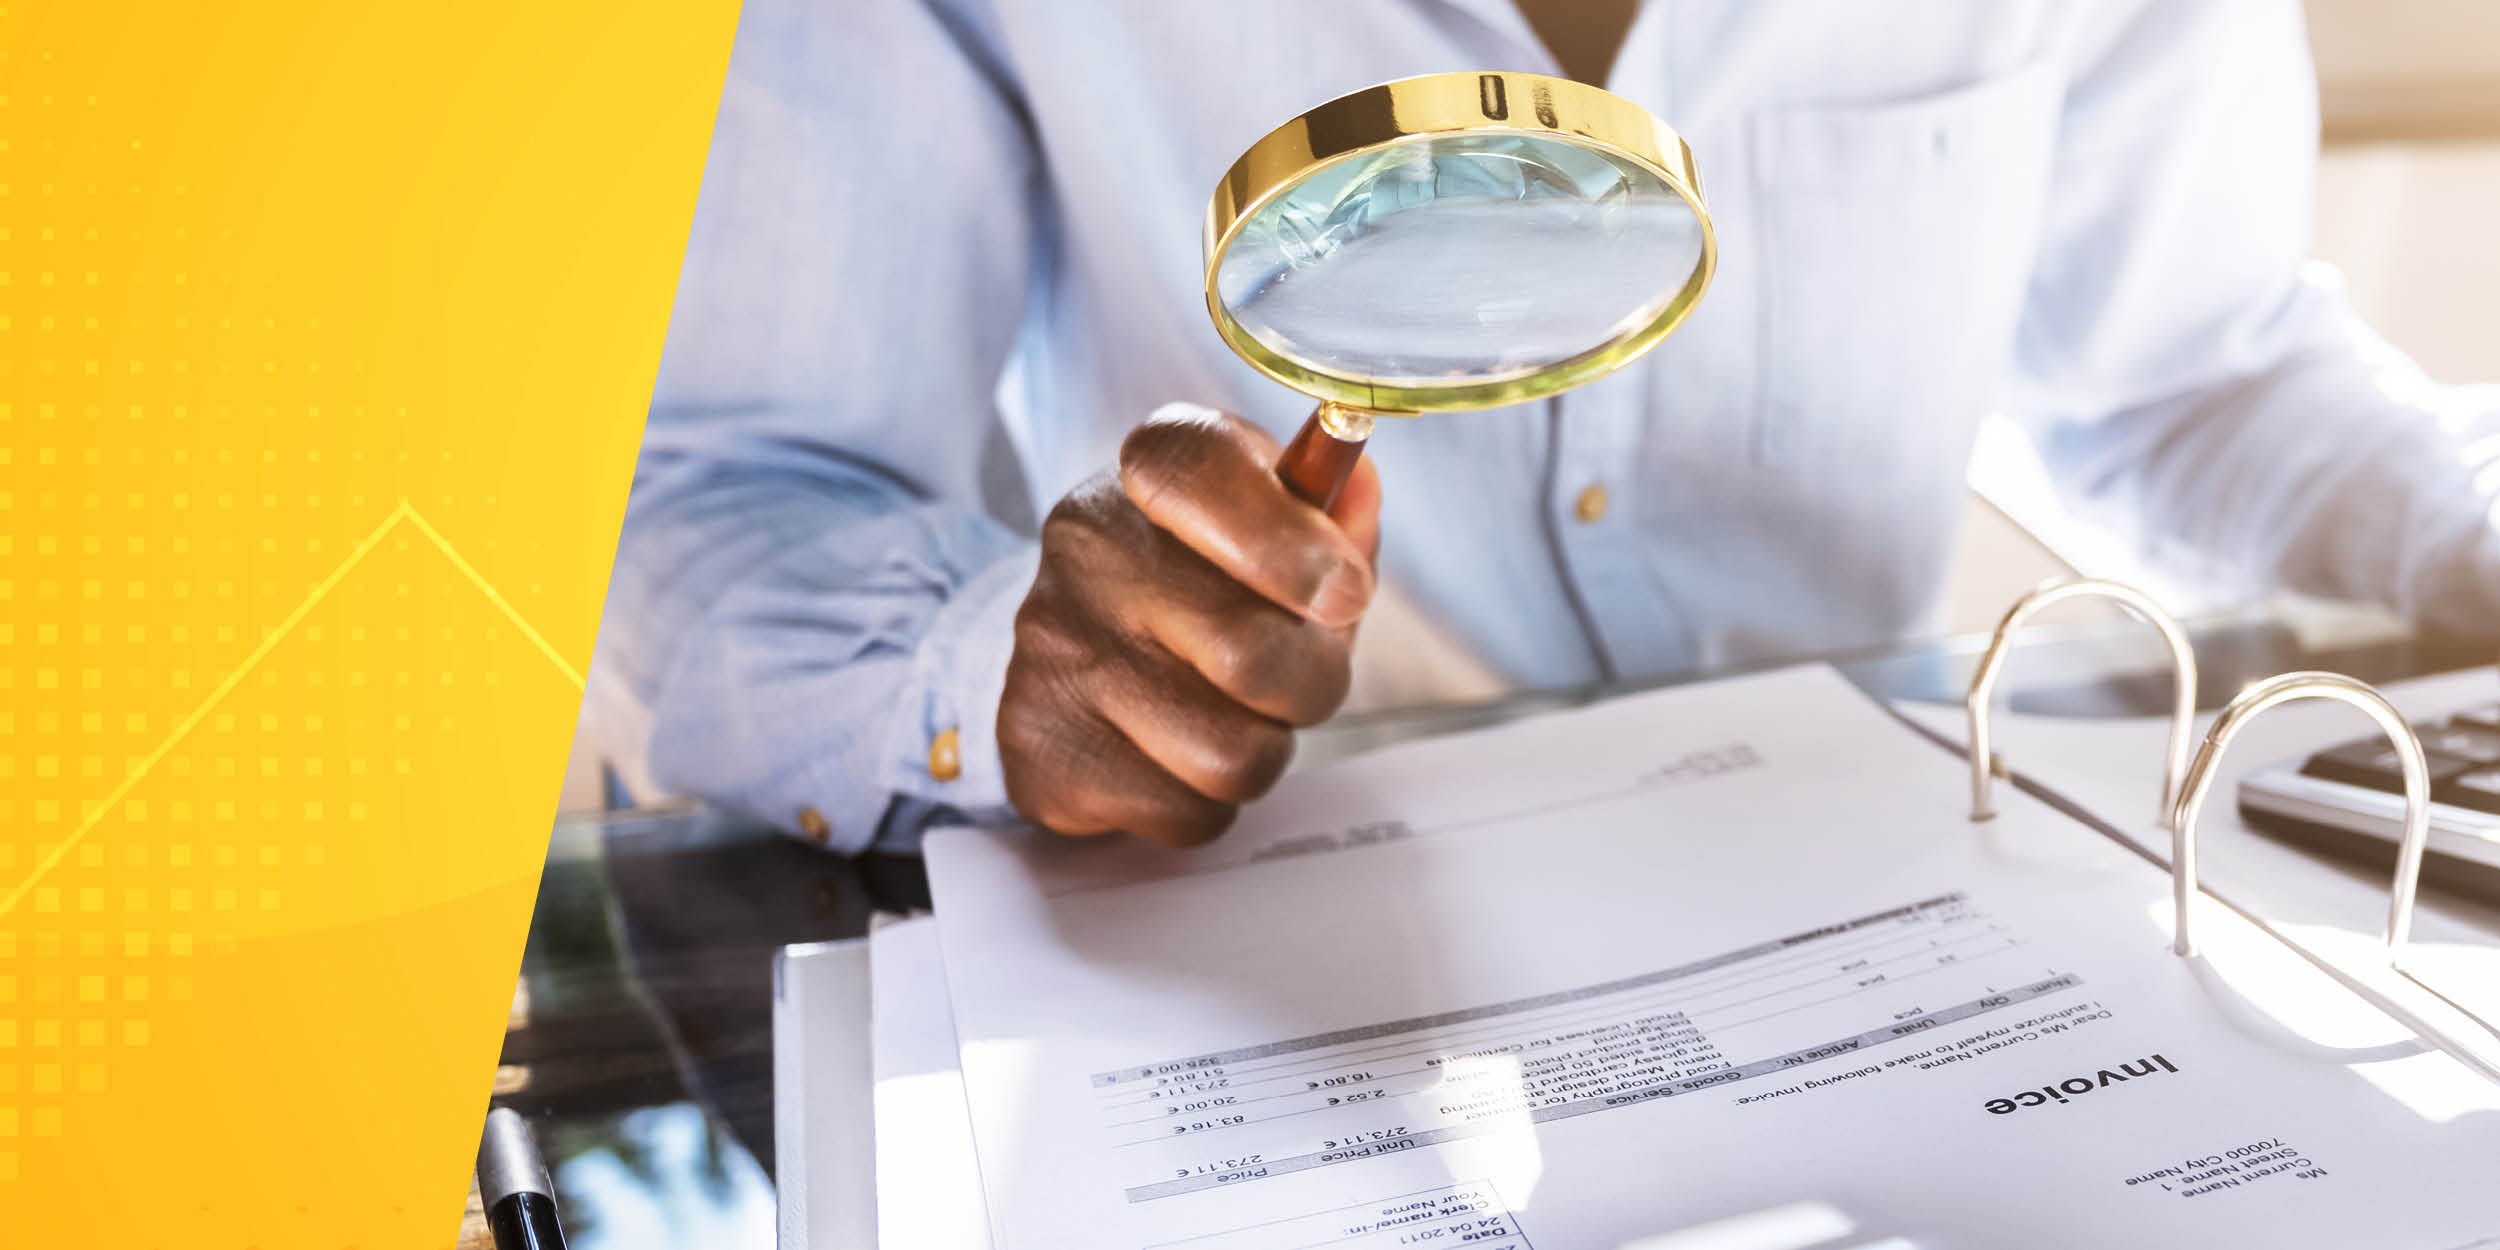 hand holding magnifying glass over paperwork